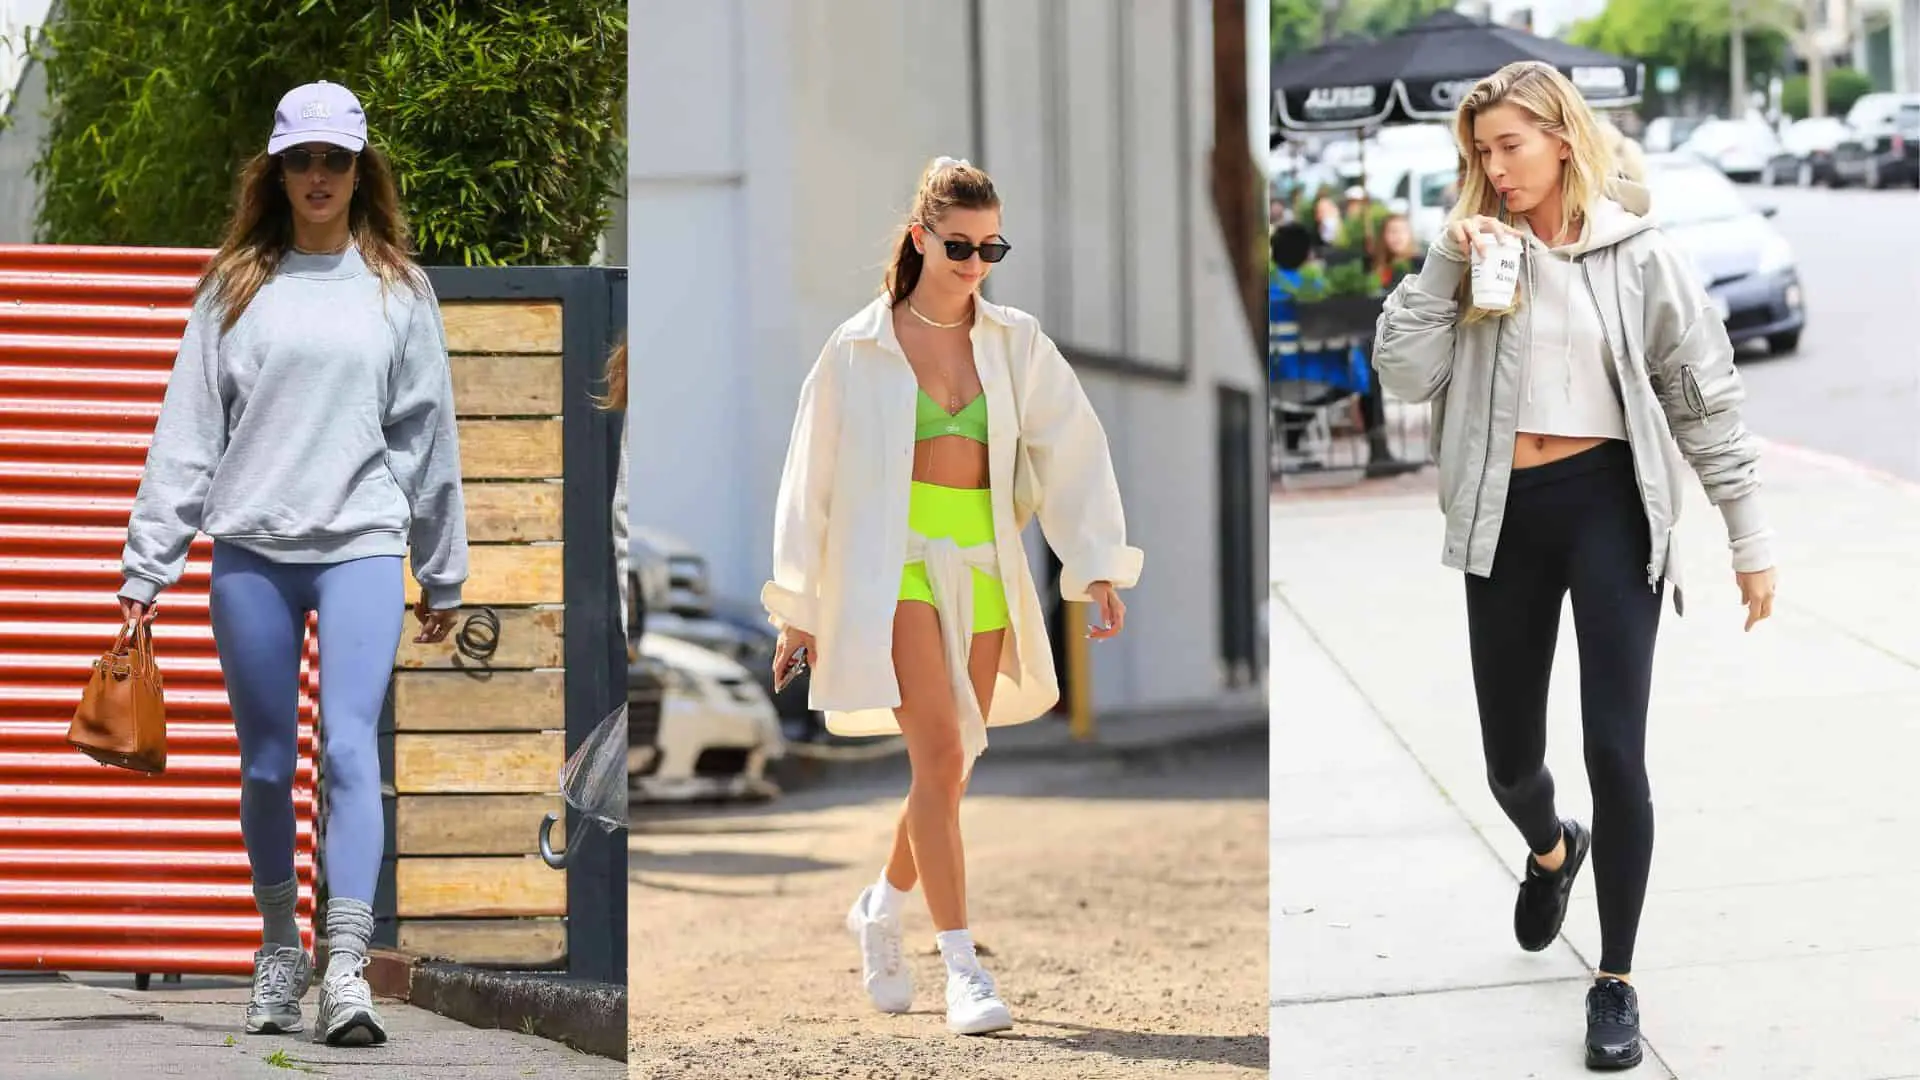 Oversized and Comfortable: The Rise of Athleisure Fashion